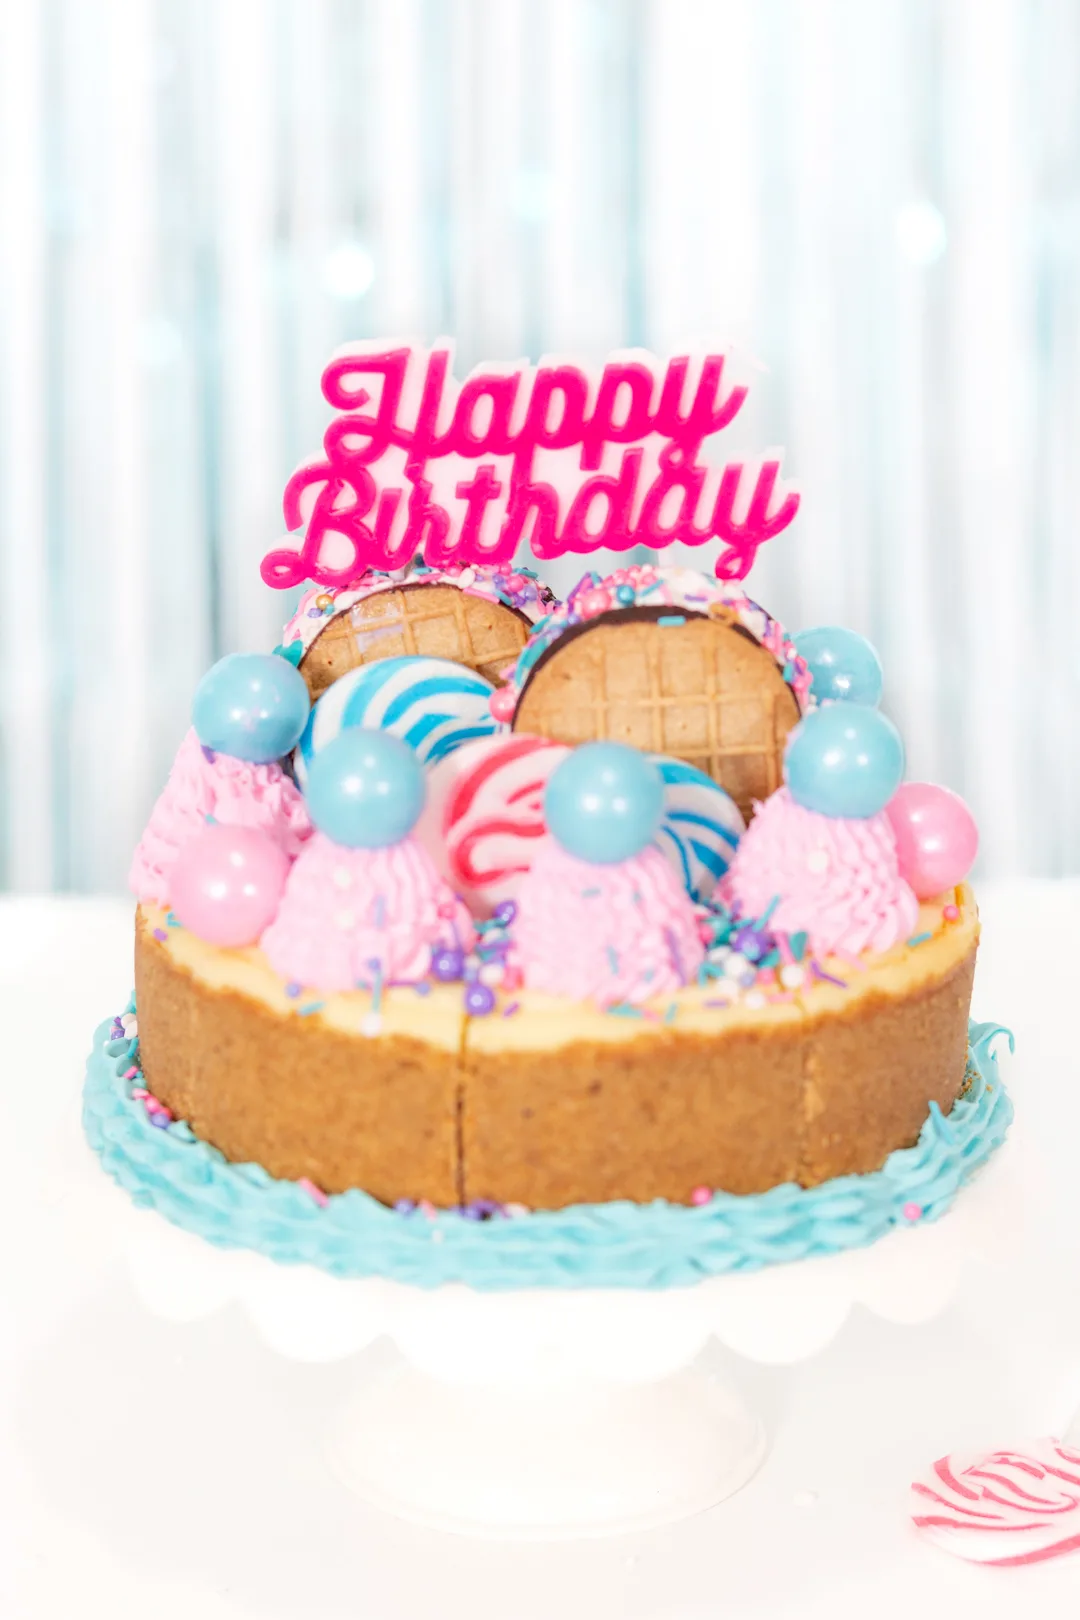 birthday cheesecake up close with pink and blue cake decorations